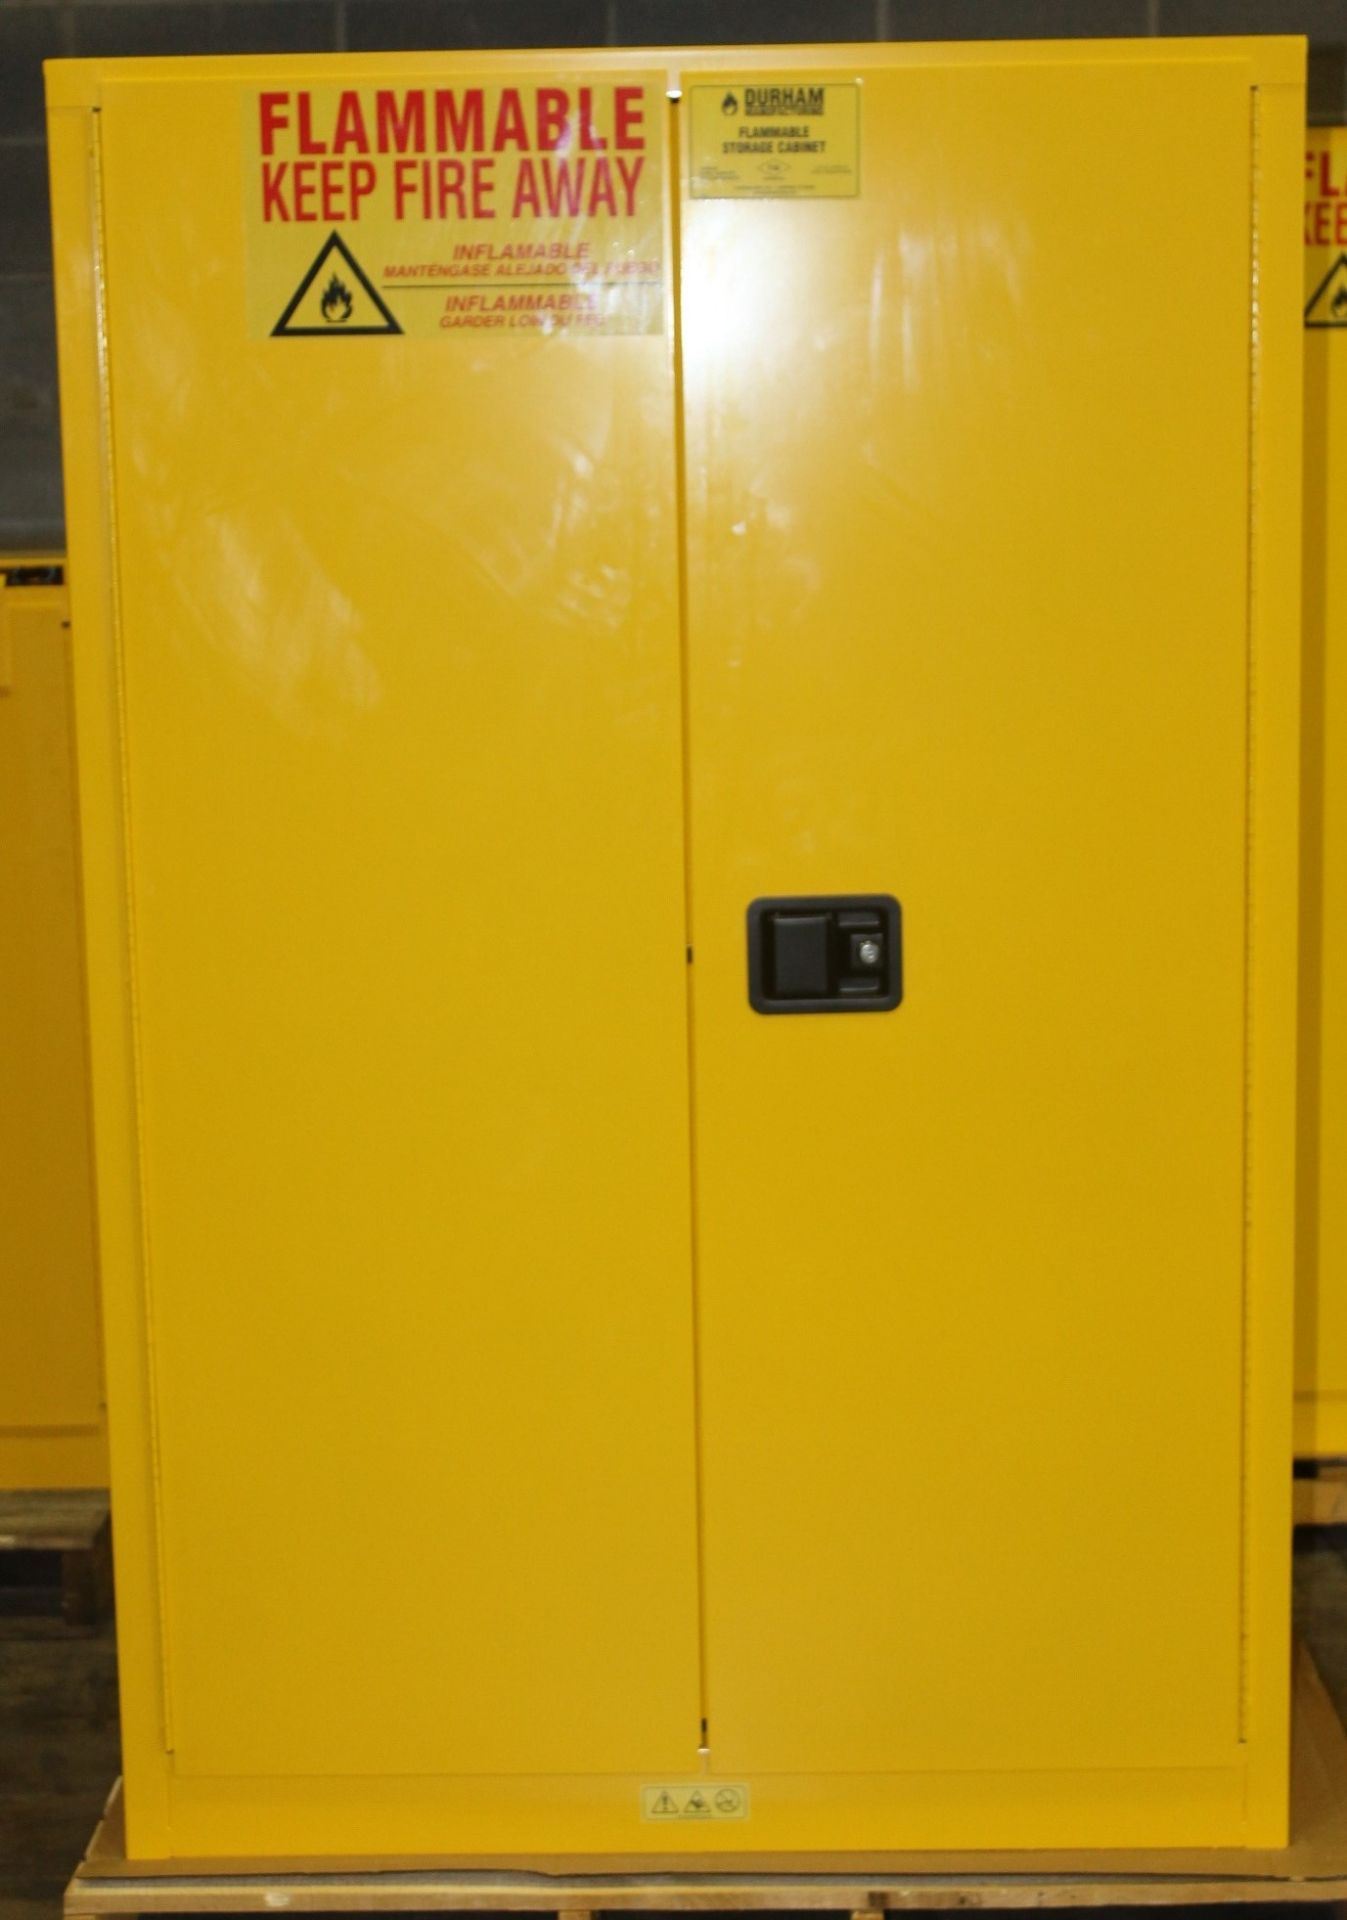 45 GALLONS FLAMMABLE MANUAL CLOSING SAFETY STORAGE CABINET, NEW